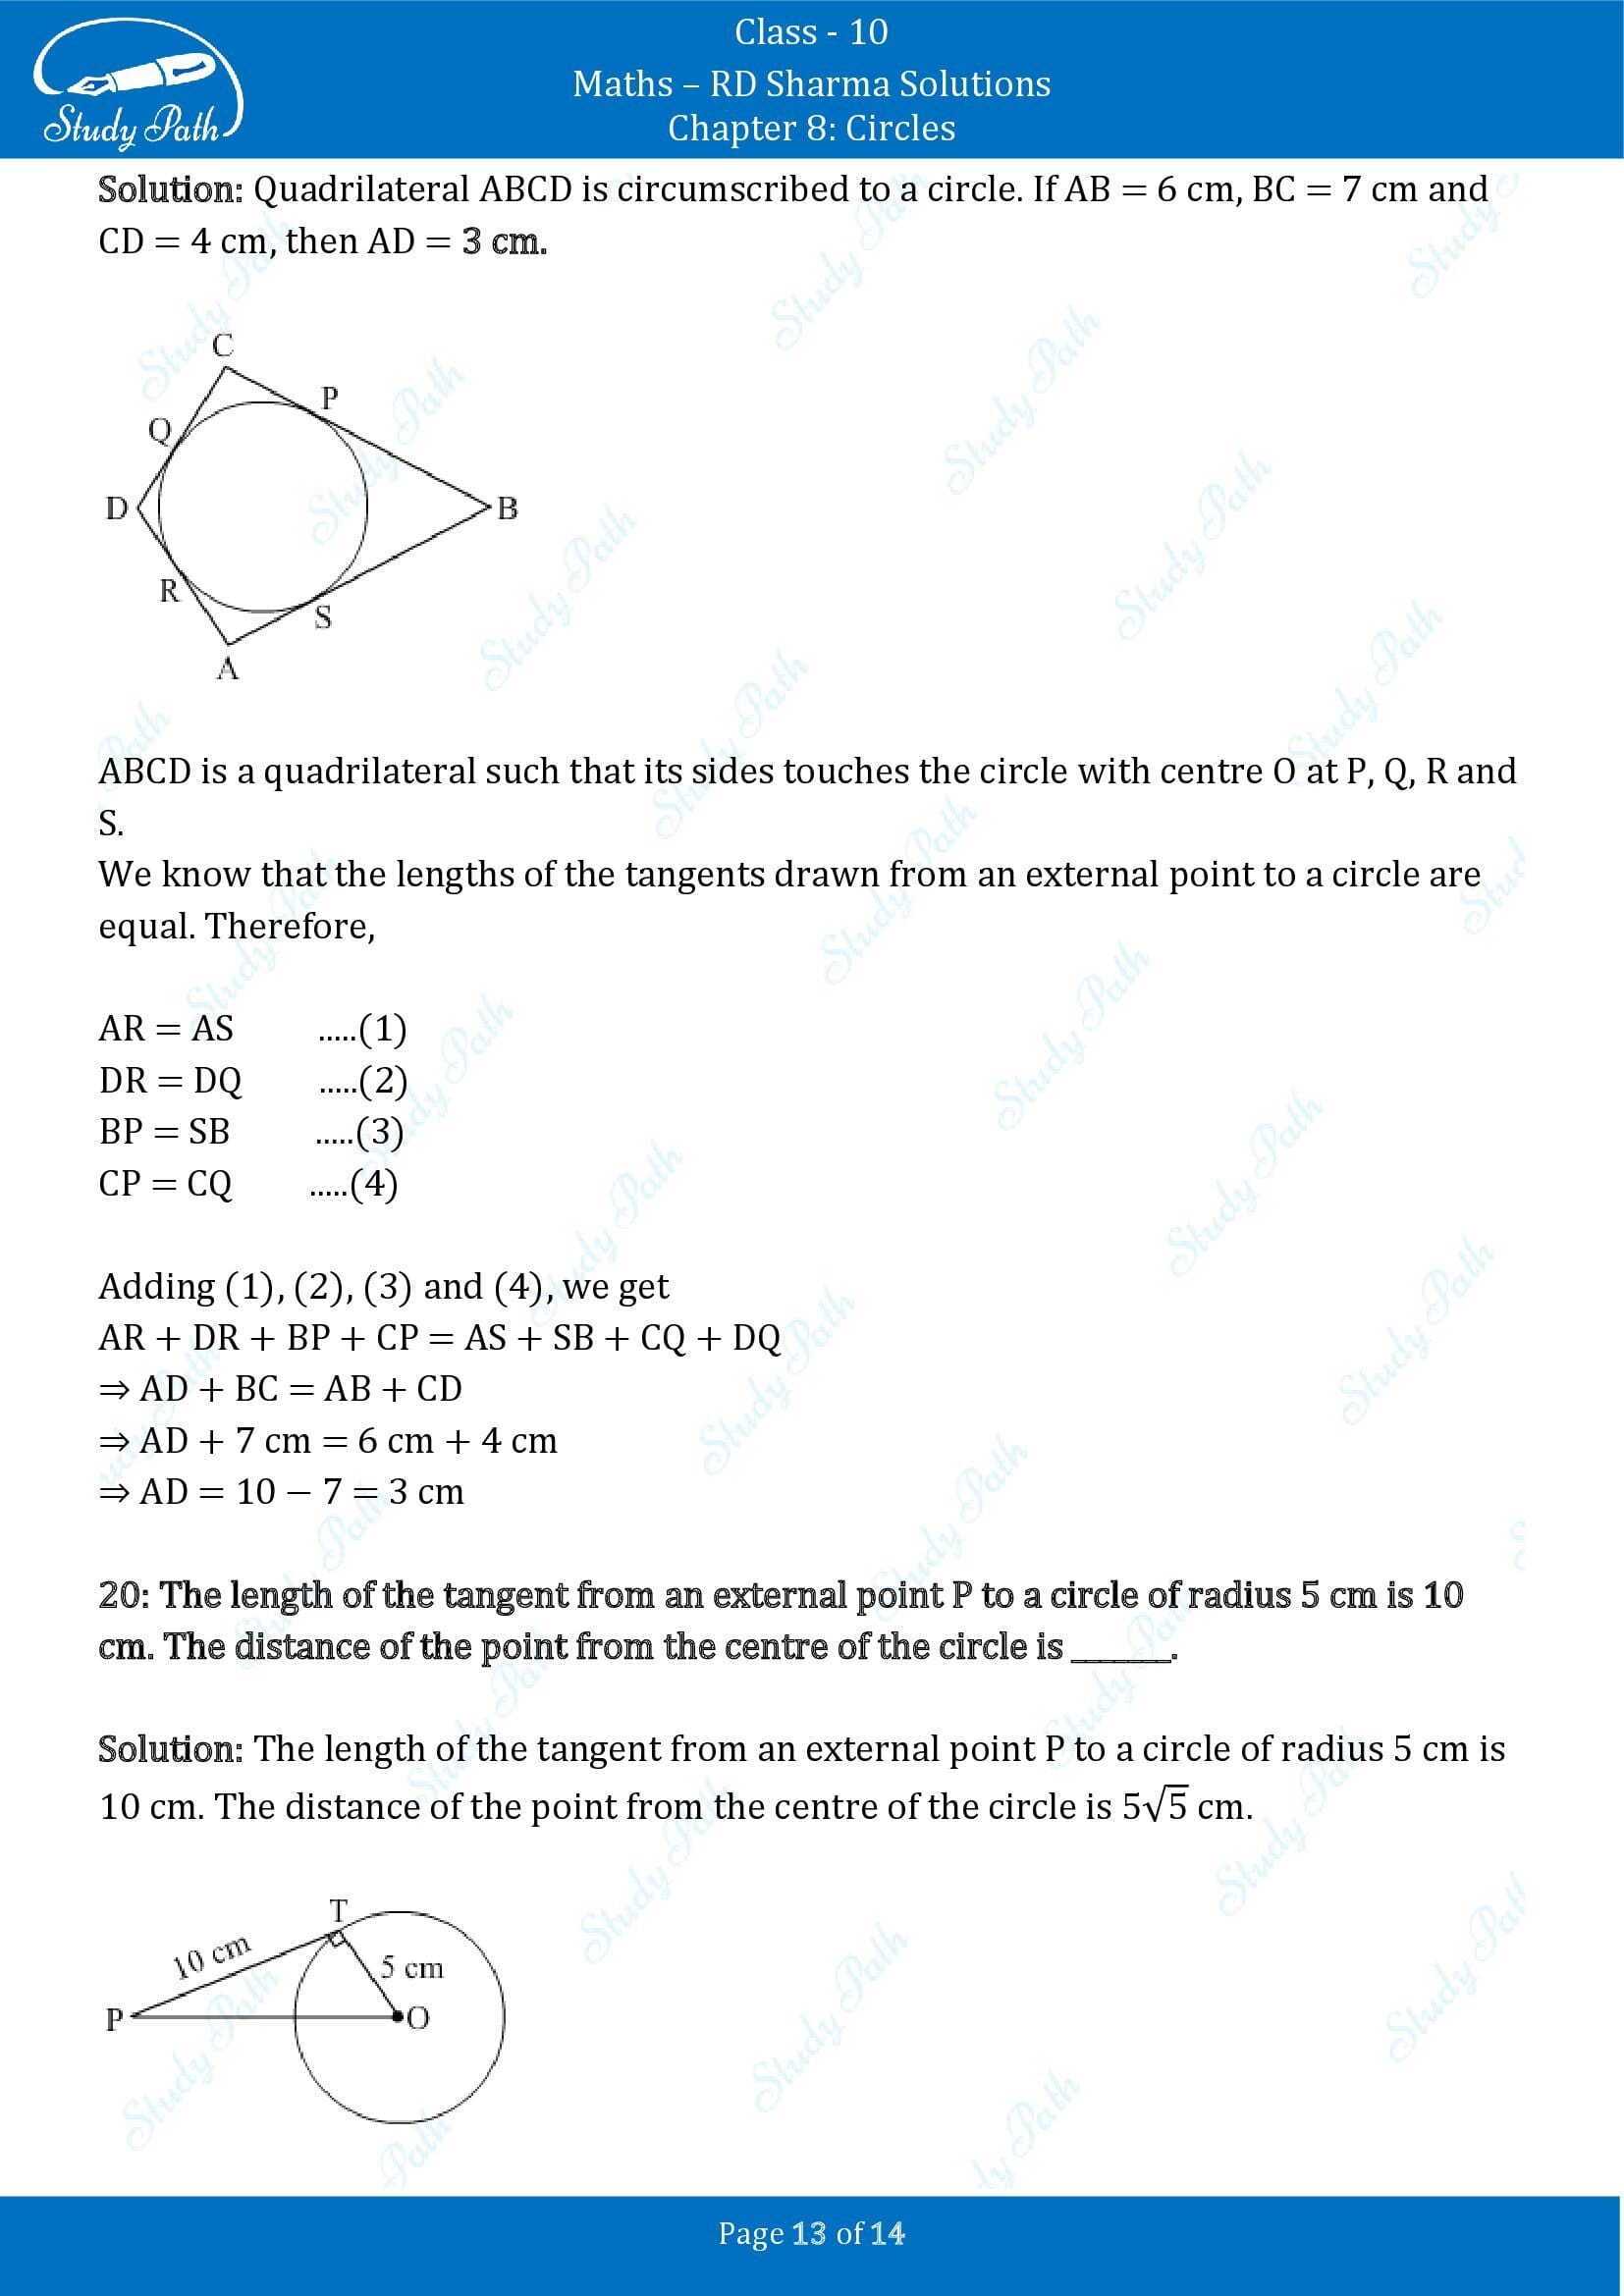 RD Sharma Solutions Class 10 Chapter 8 Circles Fill in the Blank Type Questions FBQs 00013